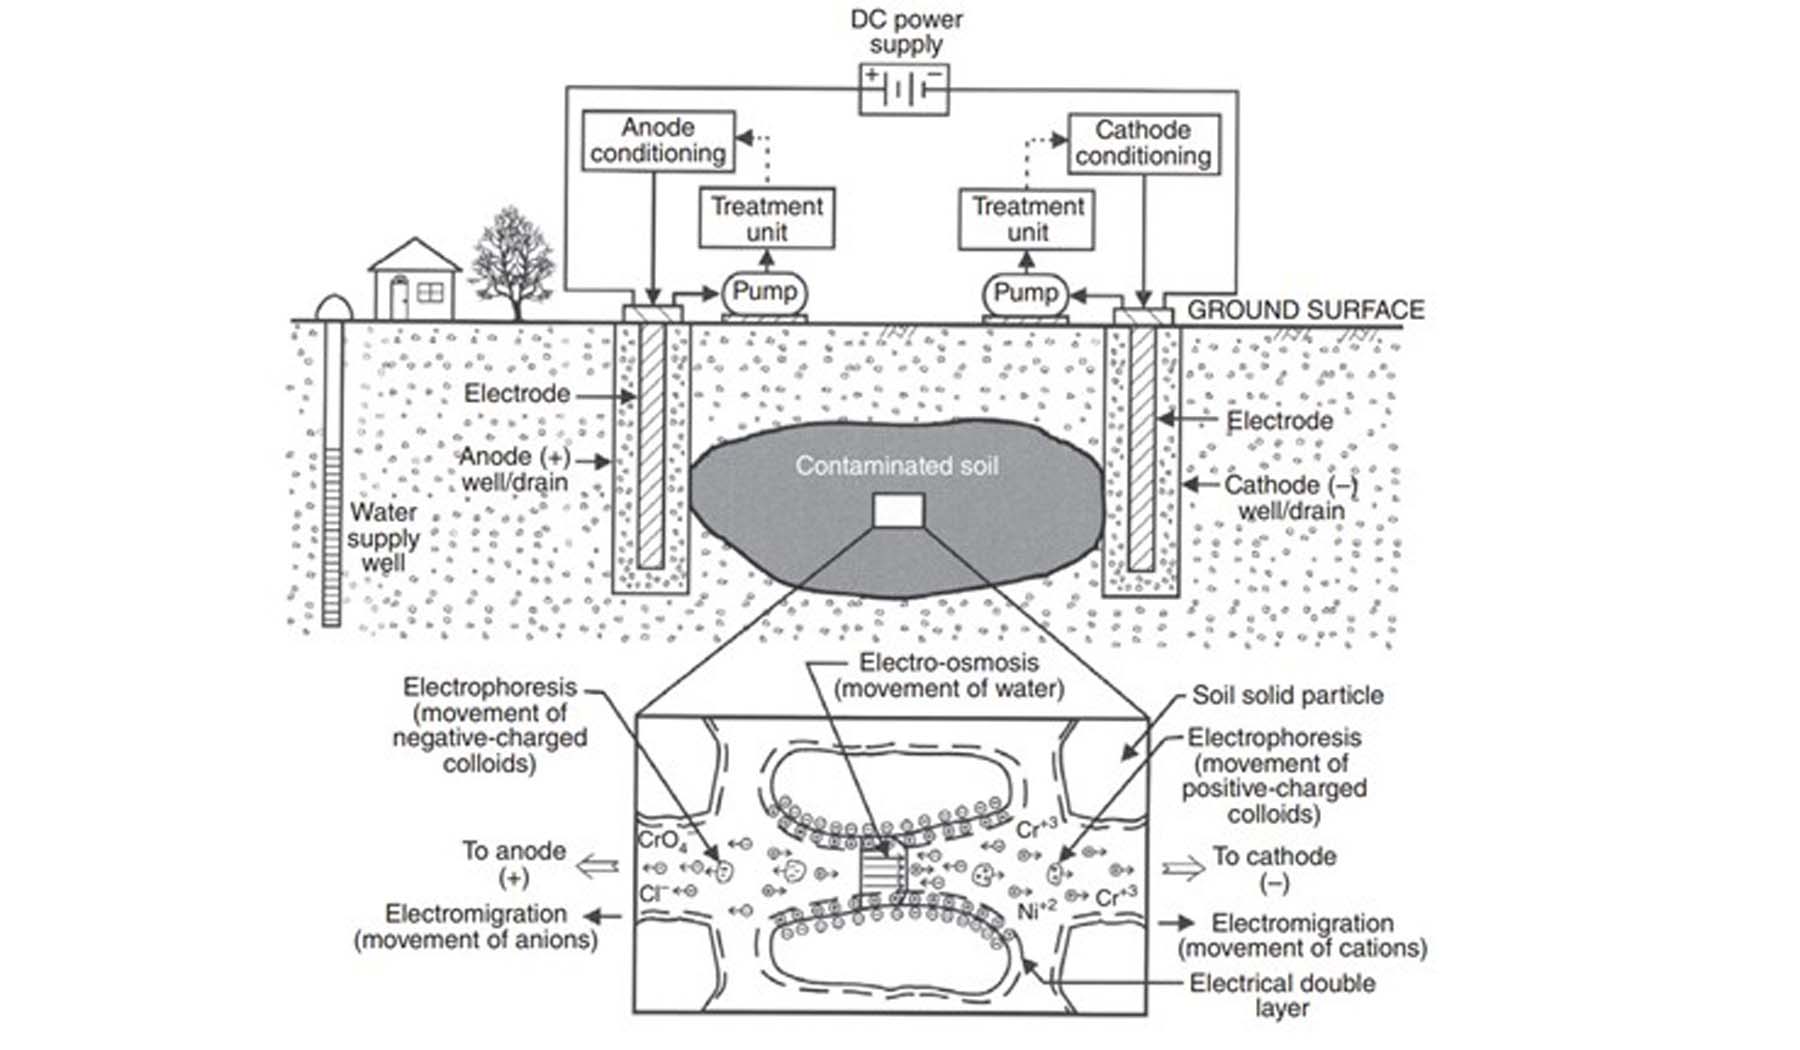 Field-scale in situ electrochemical treatment with a diagram of electrokinetic transport mechanisms between clay particles.